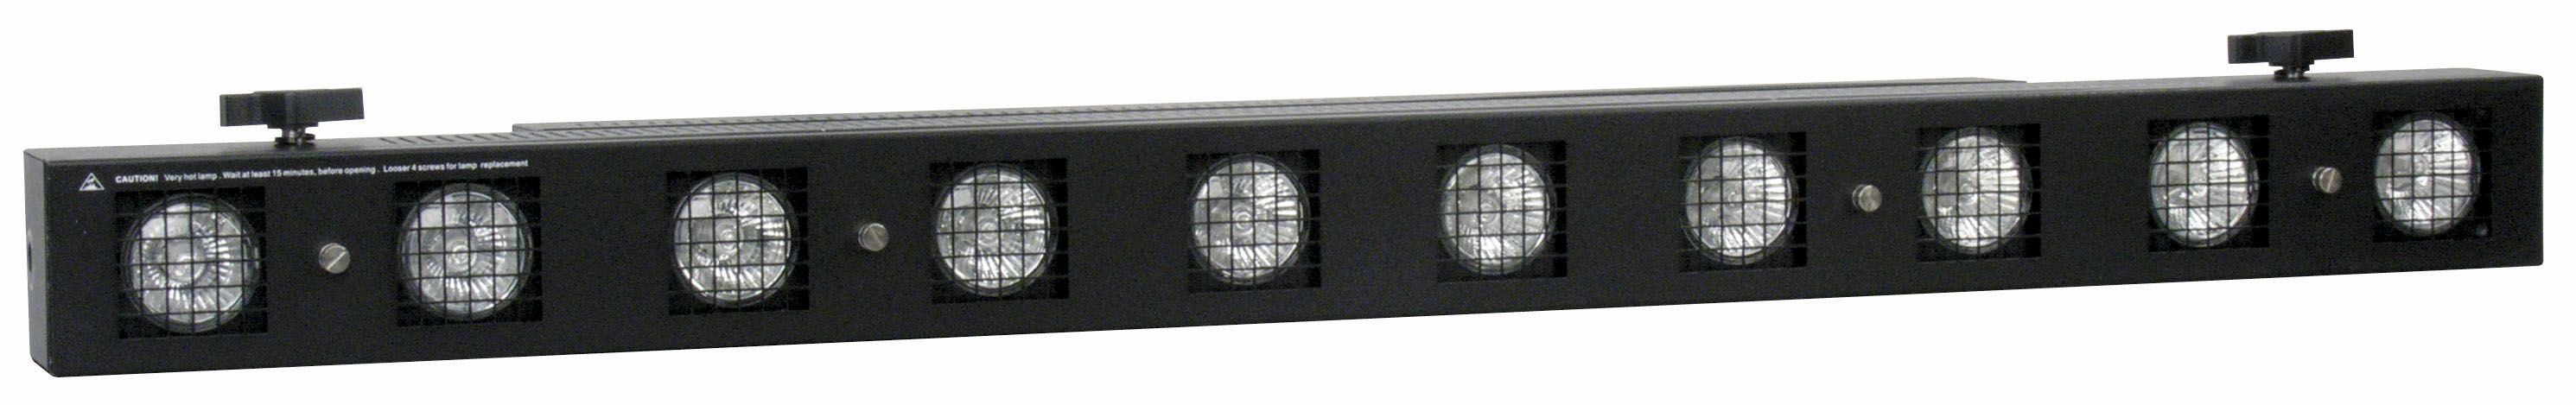 Sunstrip Active MKII Incl. lamps & Powercon-lead